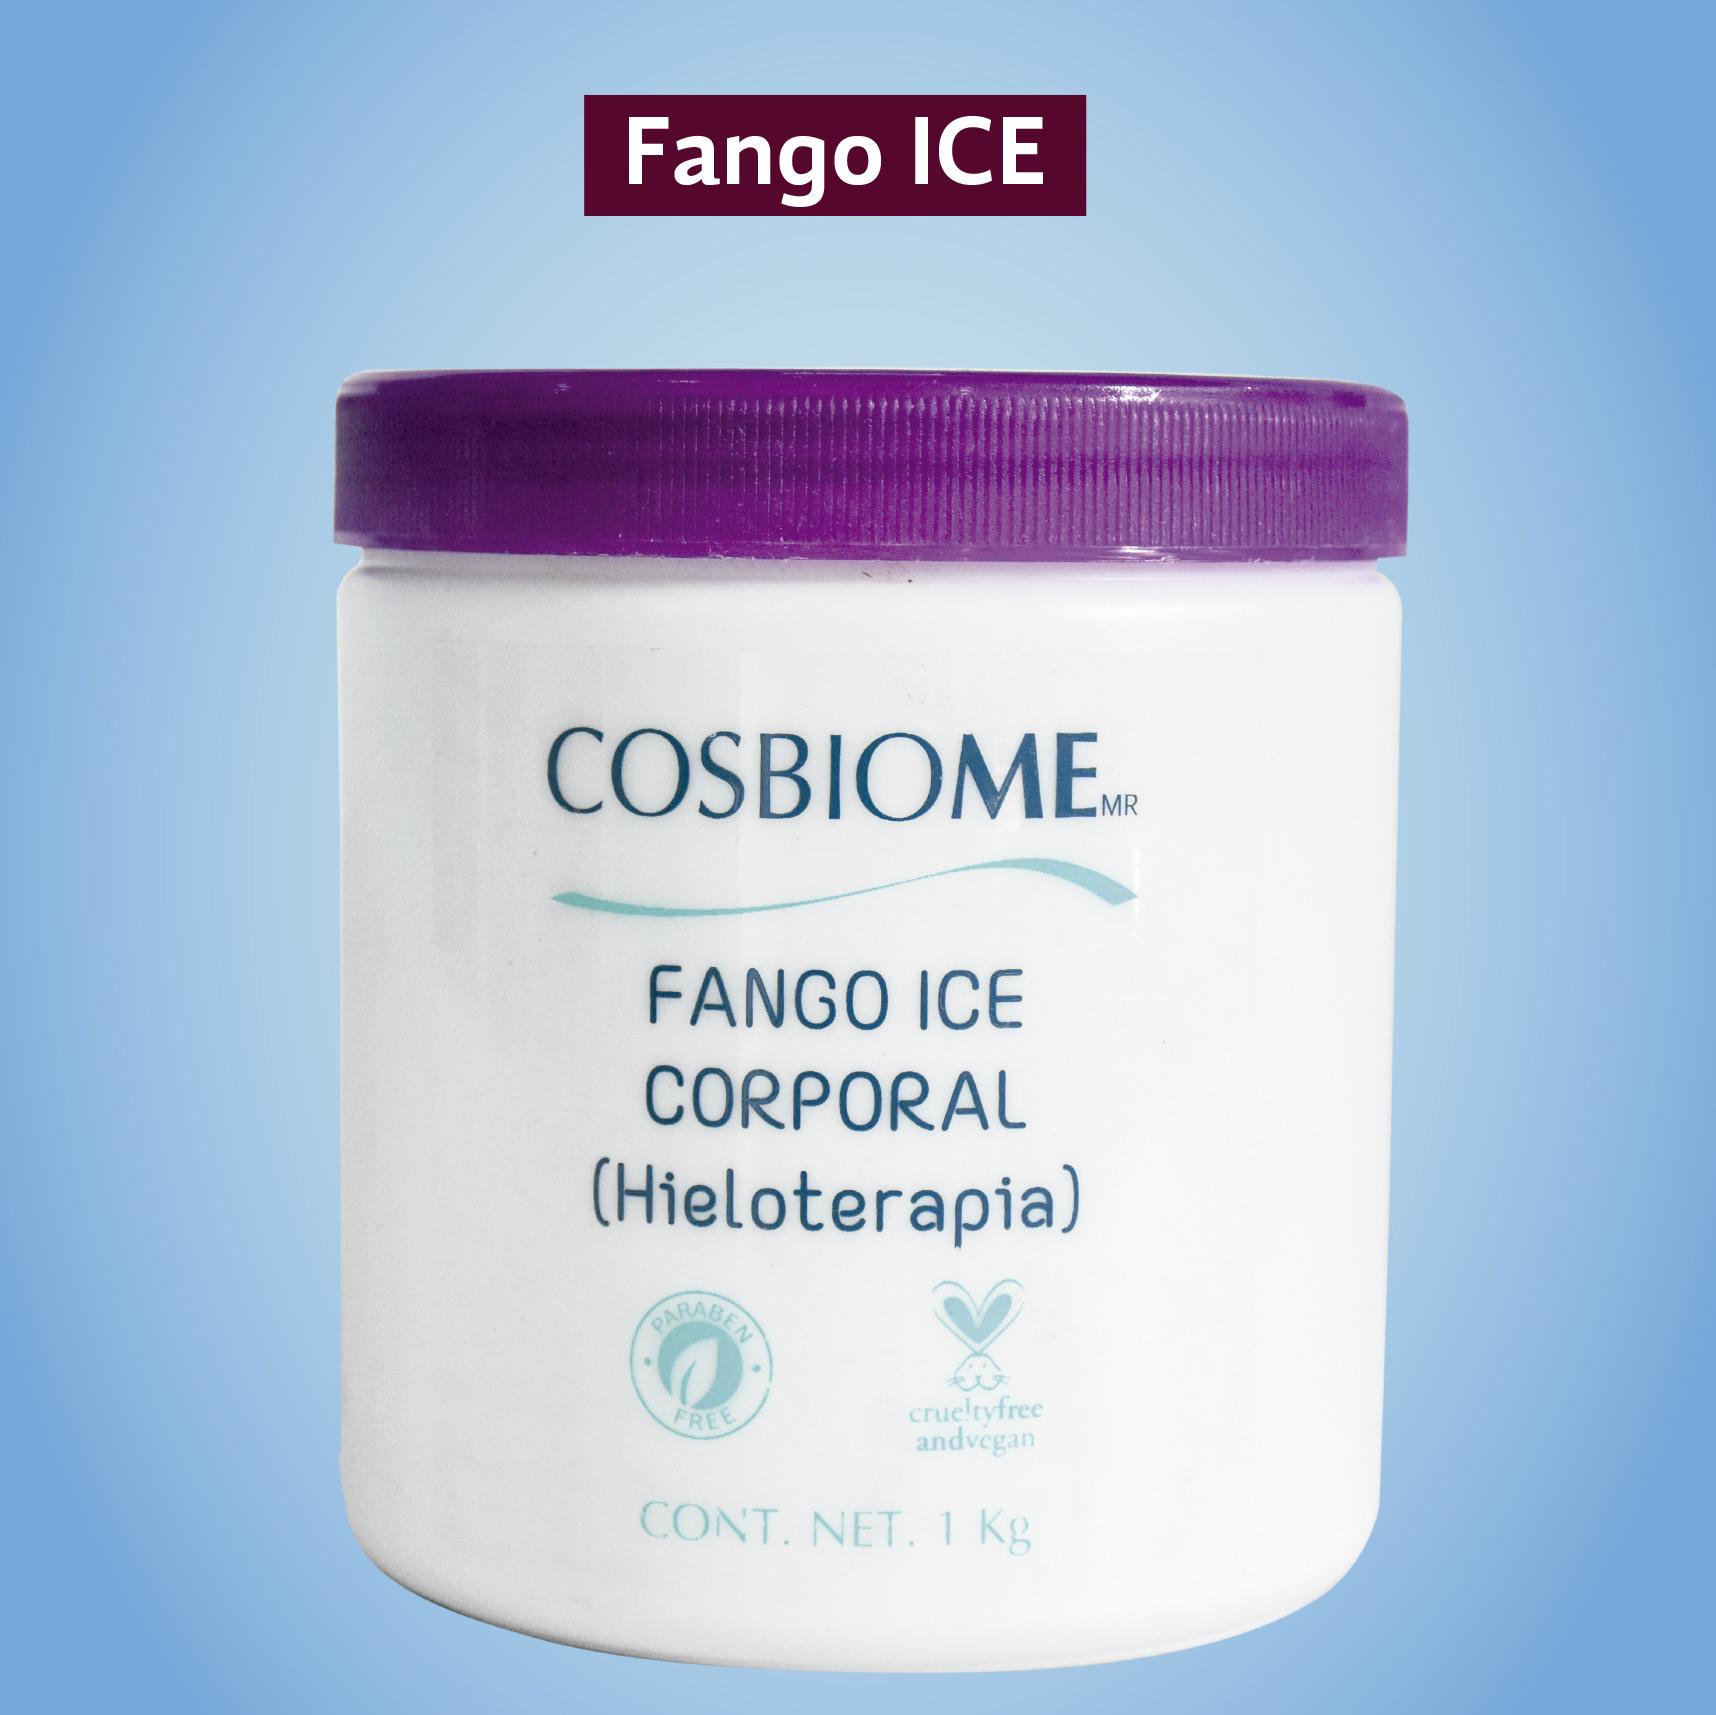 FANGO ICE CORPORAL 1KG COSBIOME